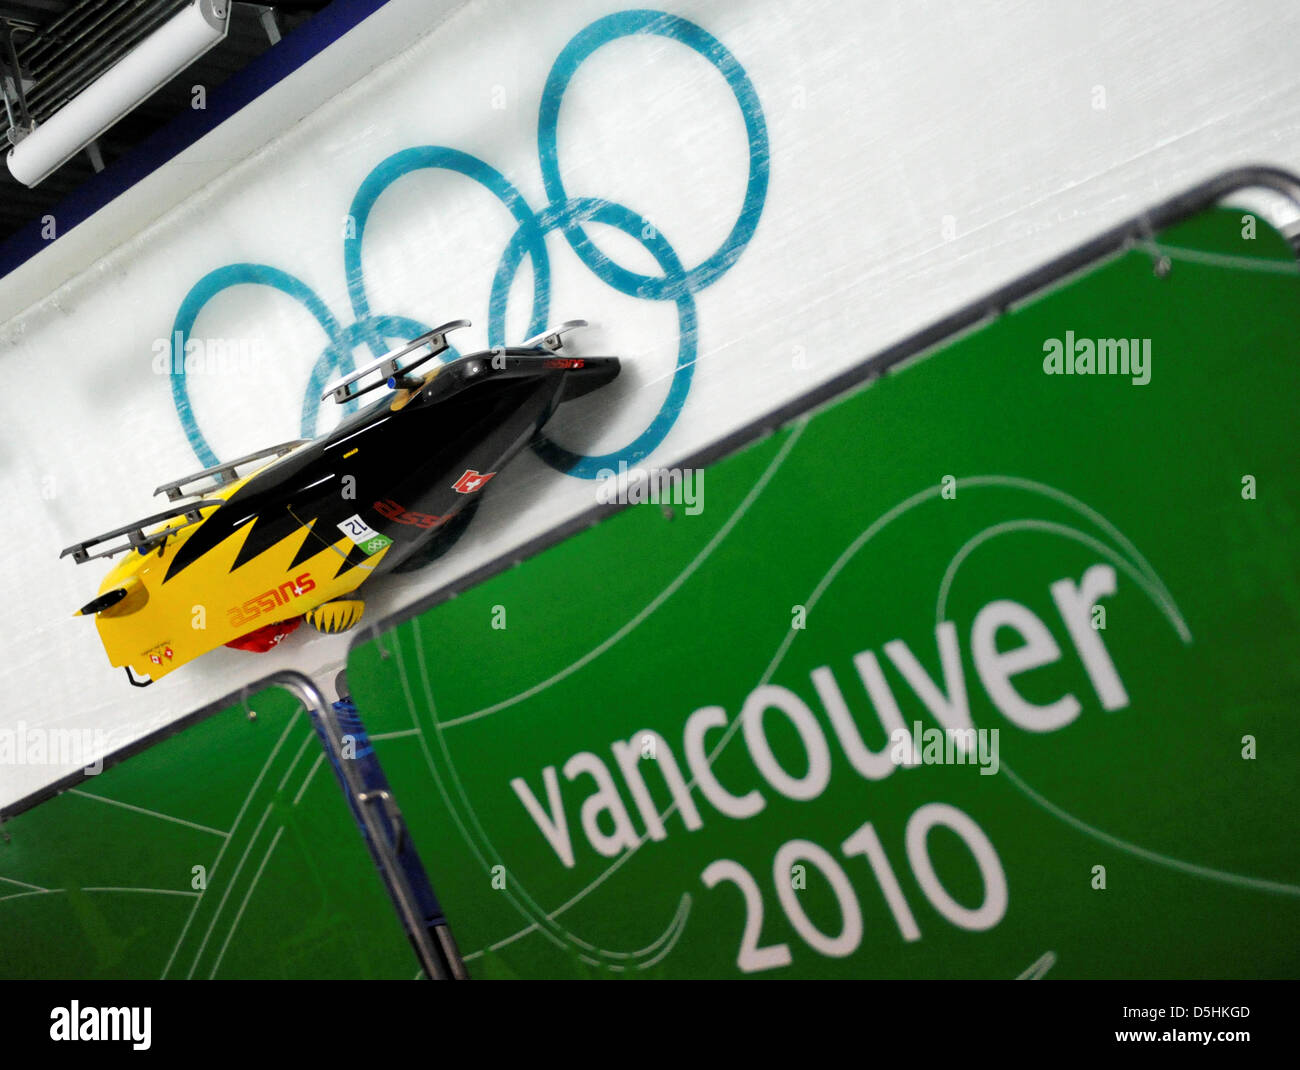 The Bob of Swiss 3 with Daniel Schmid crashes in a curve during Bobsleigh two-man training at the Whistler Sliding Center during the Vancouver 2010 Olympic Games in Whistler, Canada, 17 February 2010. Stock Photo